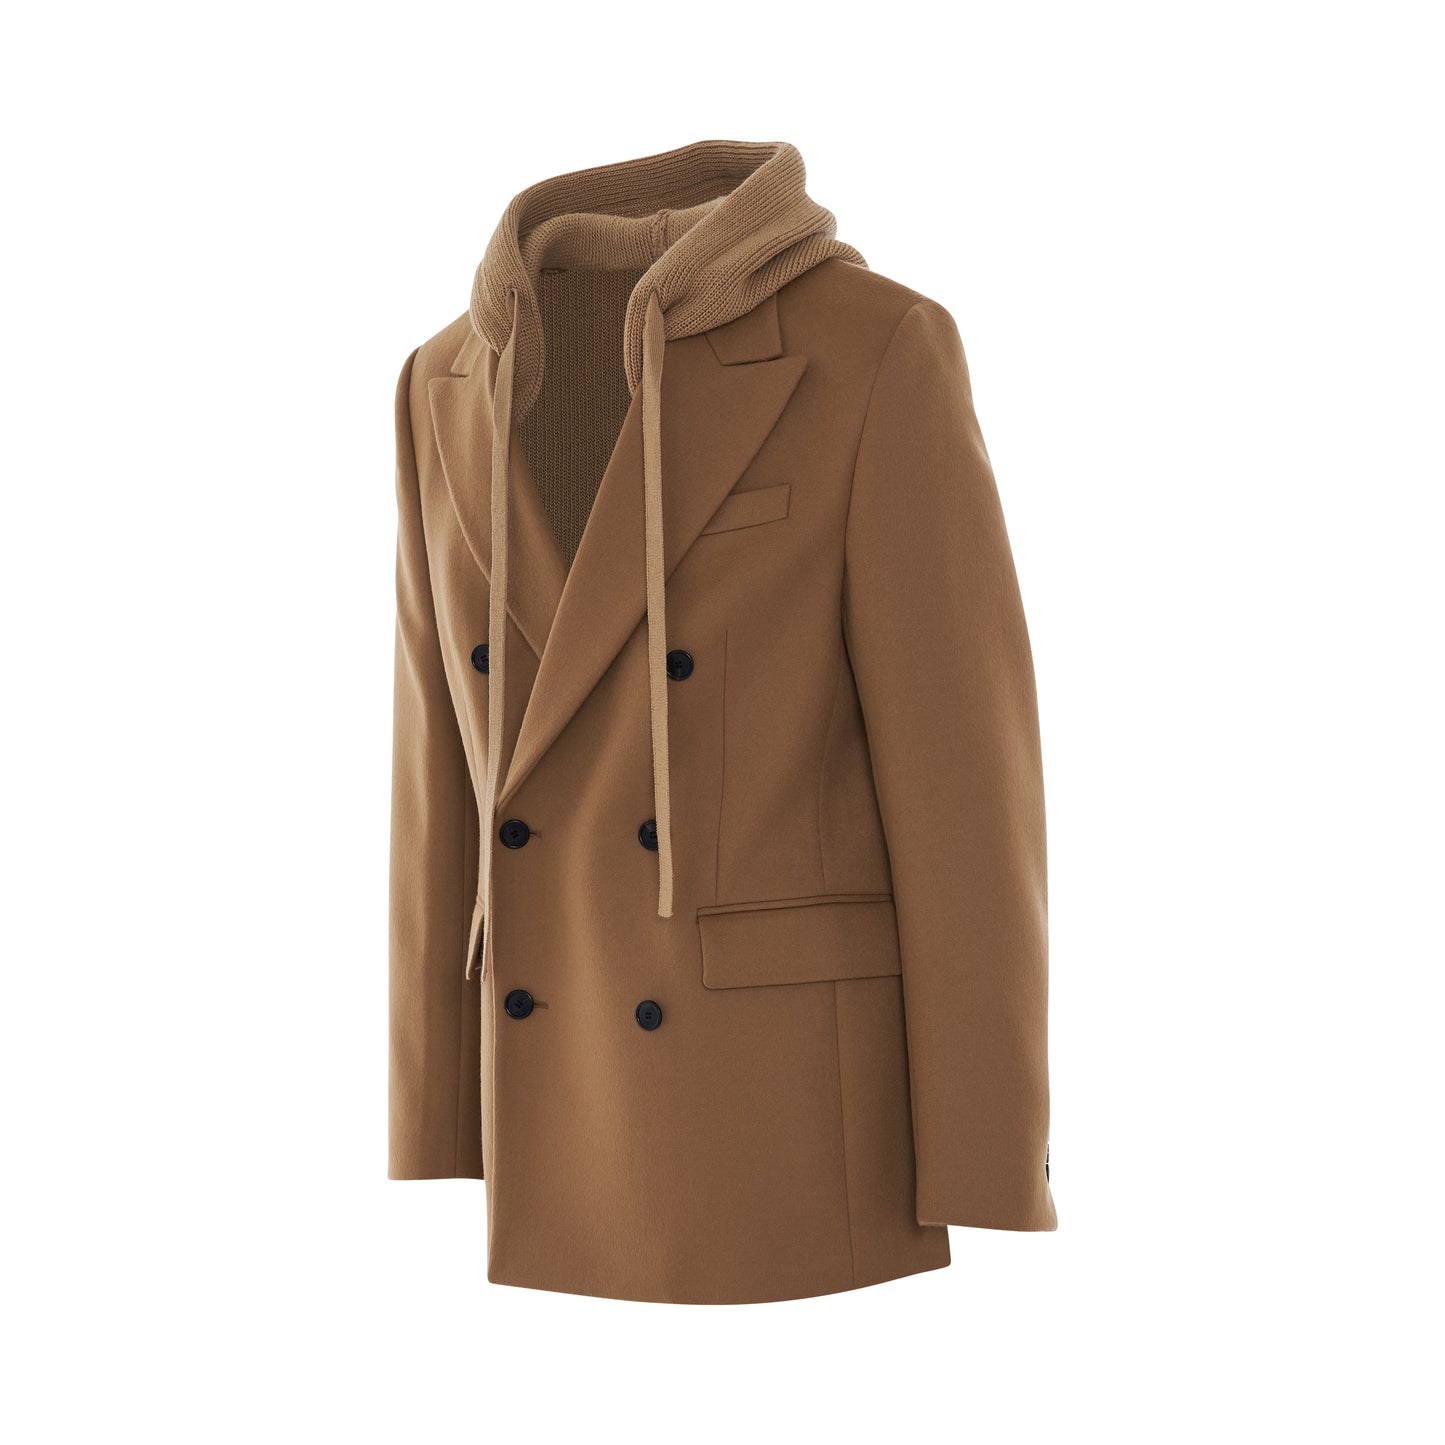 Double Breasted Hooded Jacket in Camel